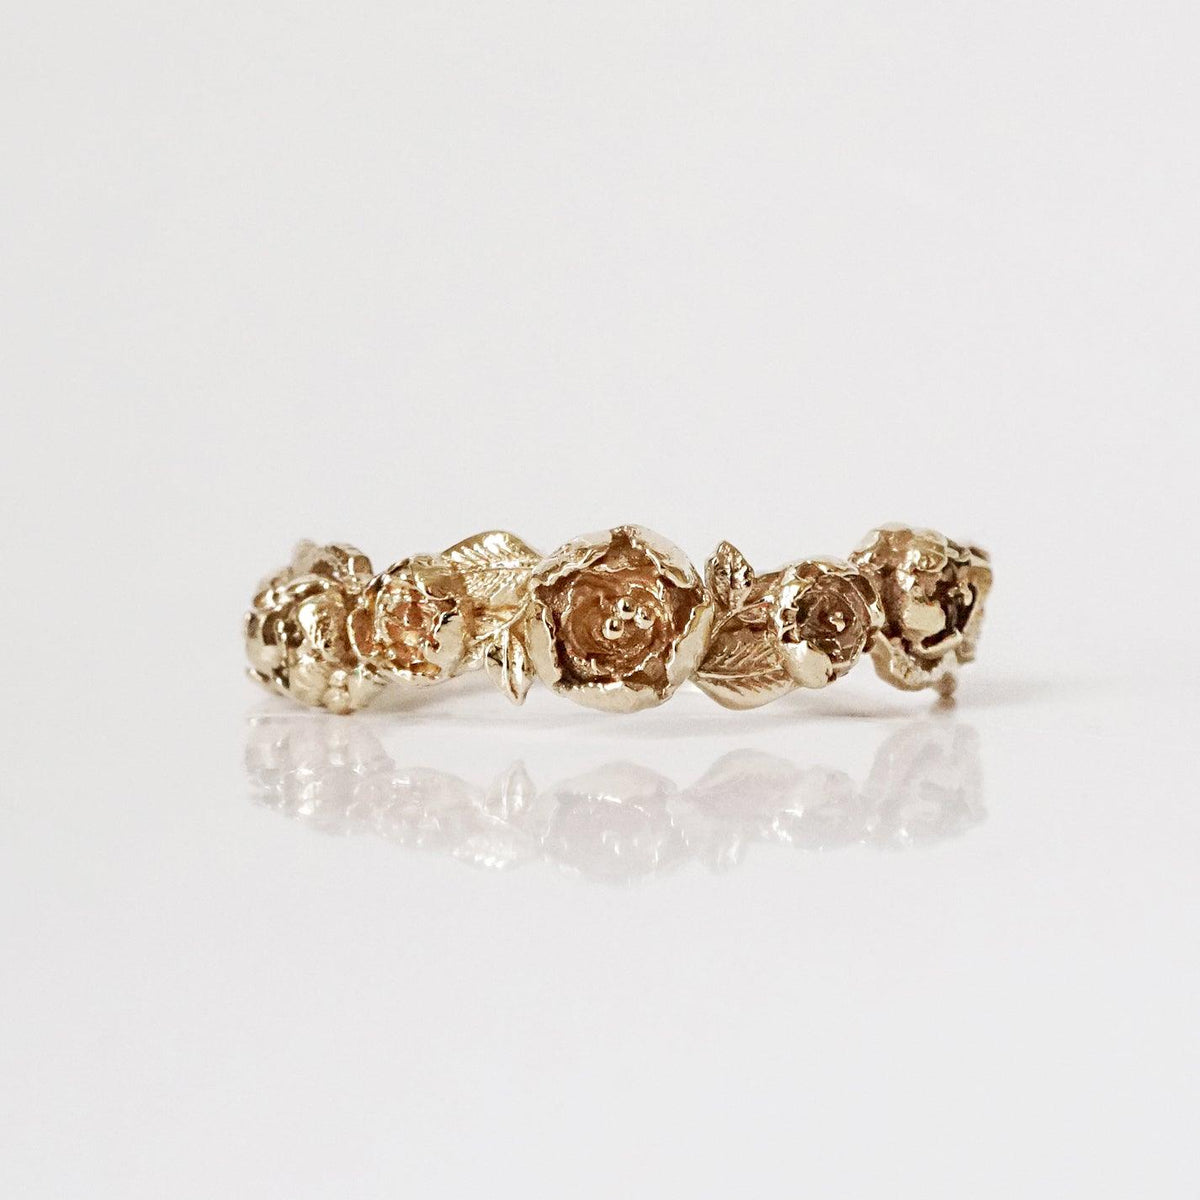 Peonies Ring Band in 14K and 18K Gold - Tippy Taste Jewelry